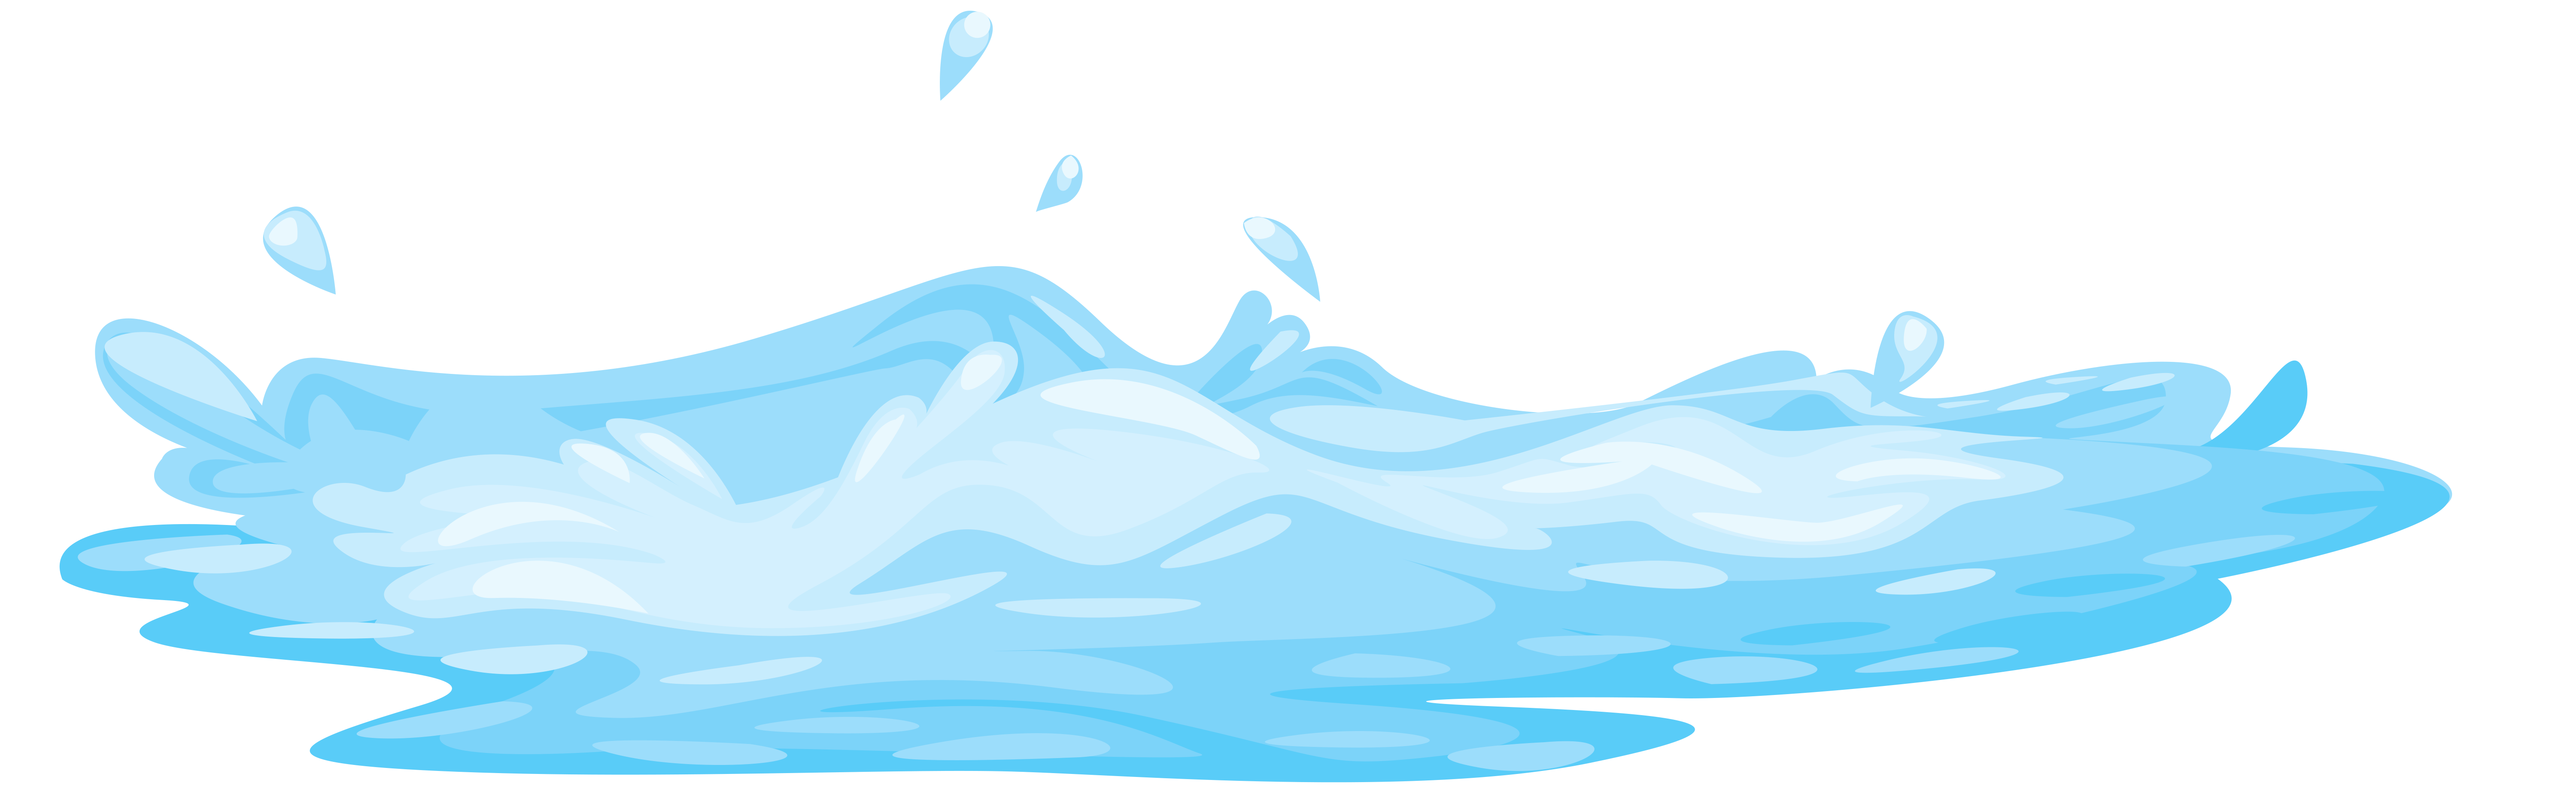 Free Water Puddle Png, Download Free Water Puddle Png png images, Free